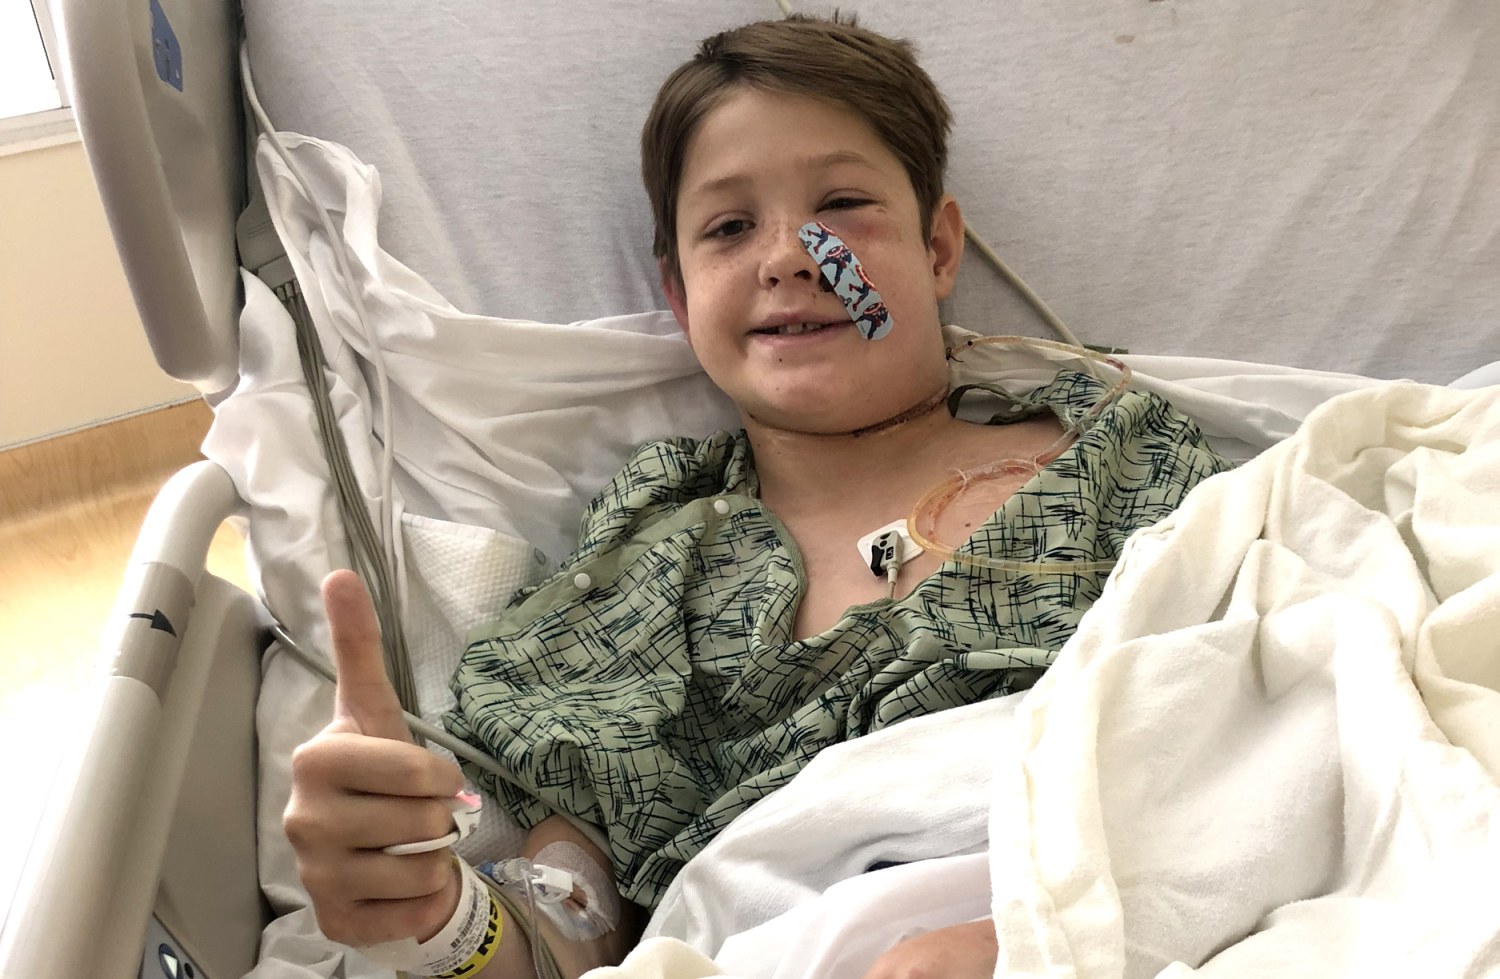 Missouri boy, 10, survives being impaled in the face by a metal